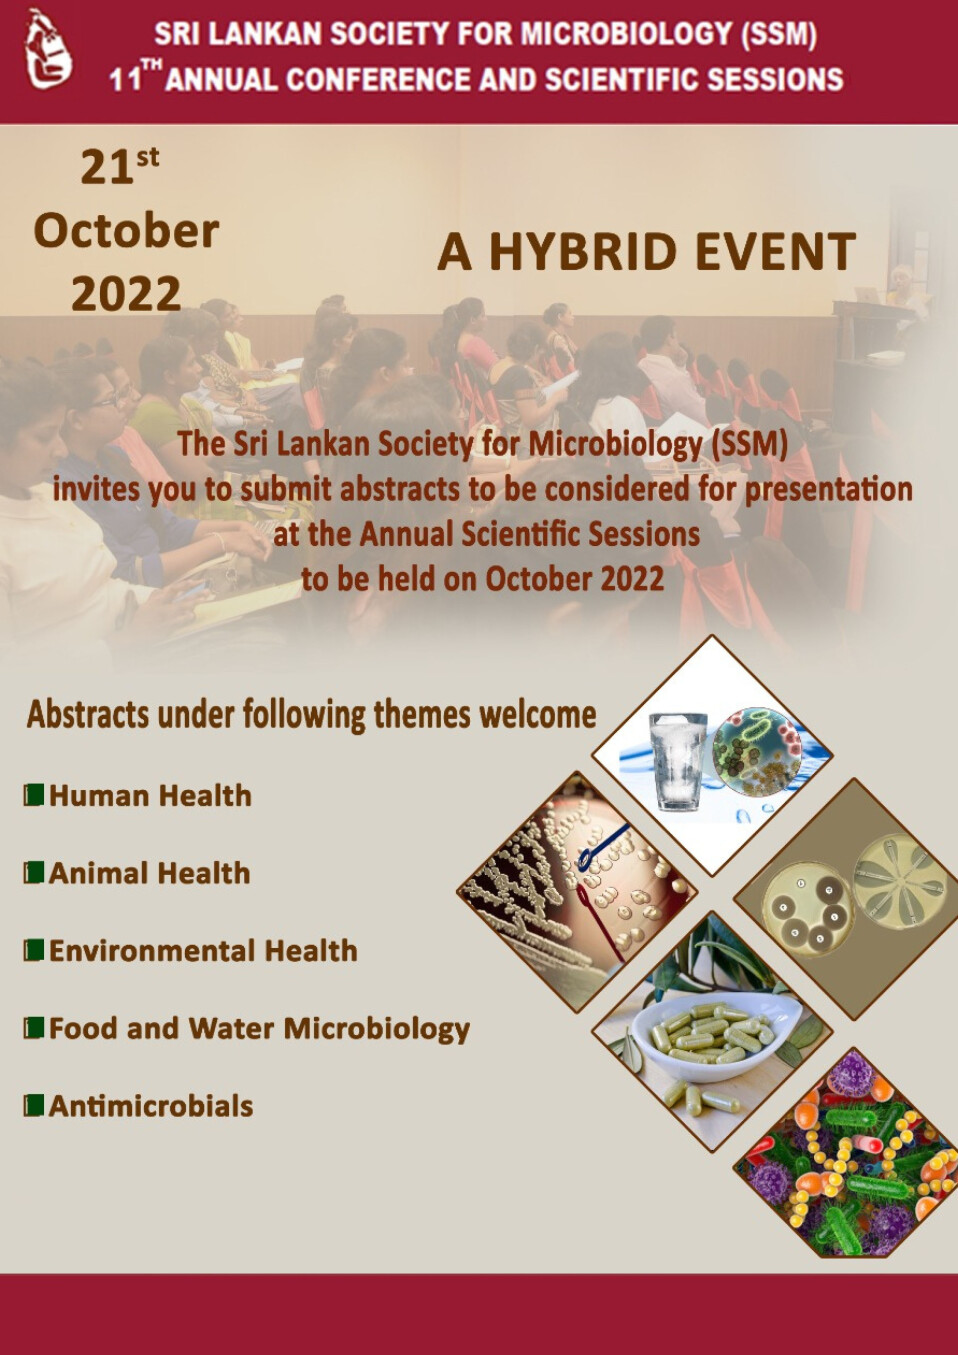 11th Annual Conference And Scientific Sessions Of Sri Lankan Society For Microbiology Ssm